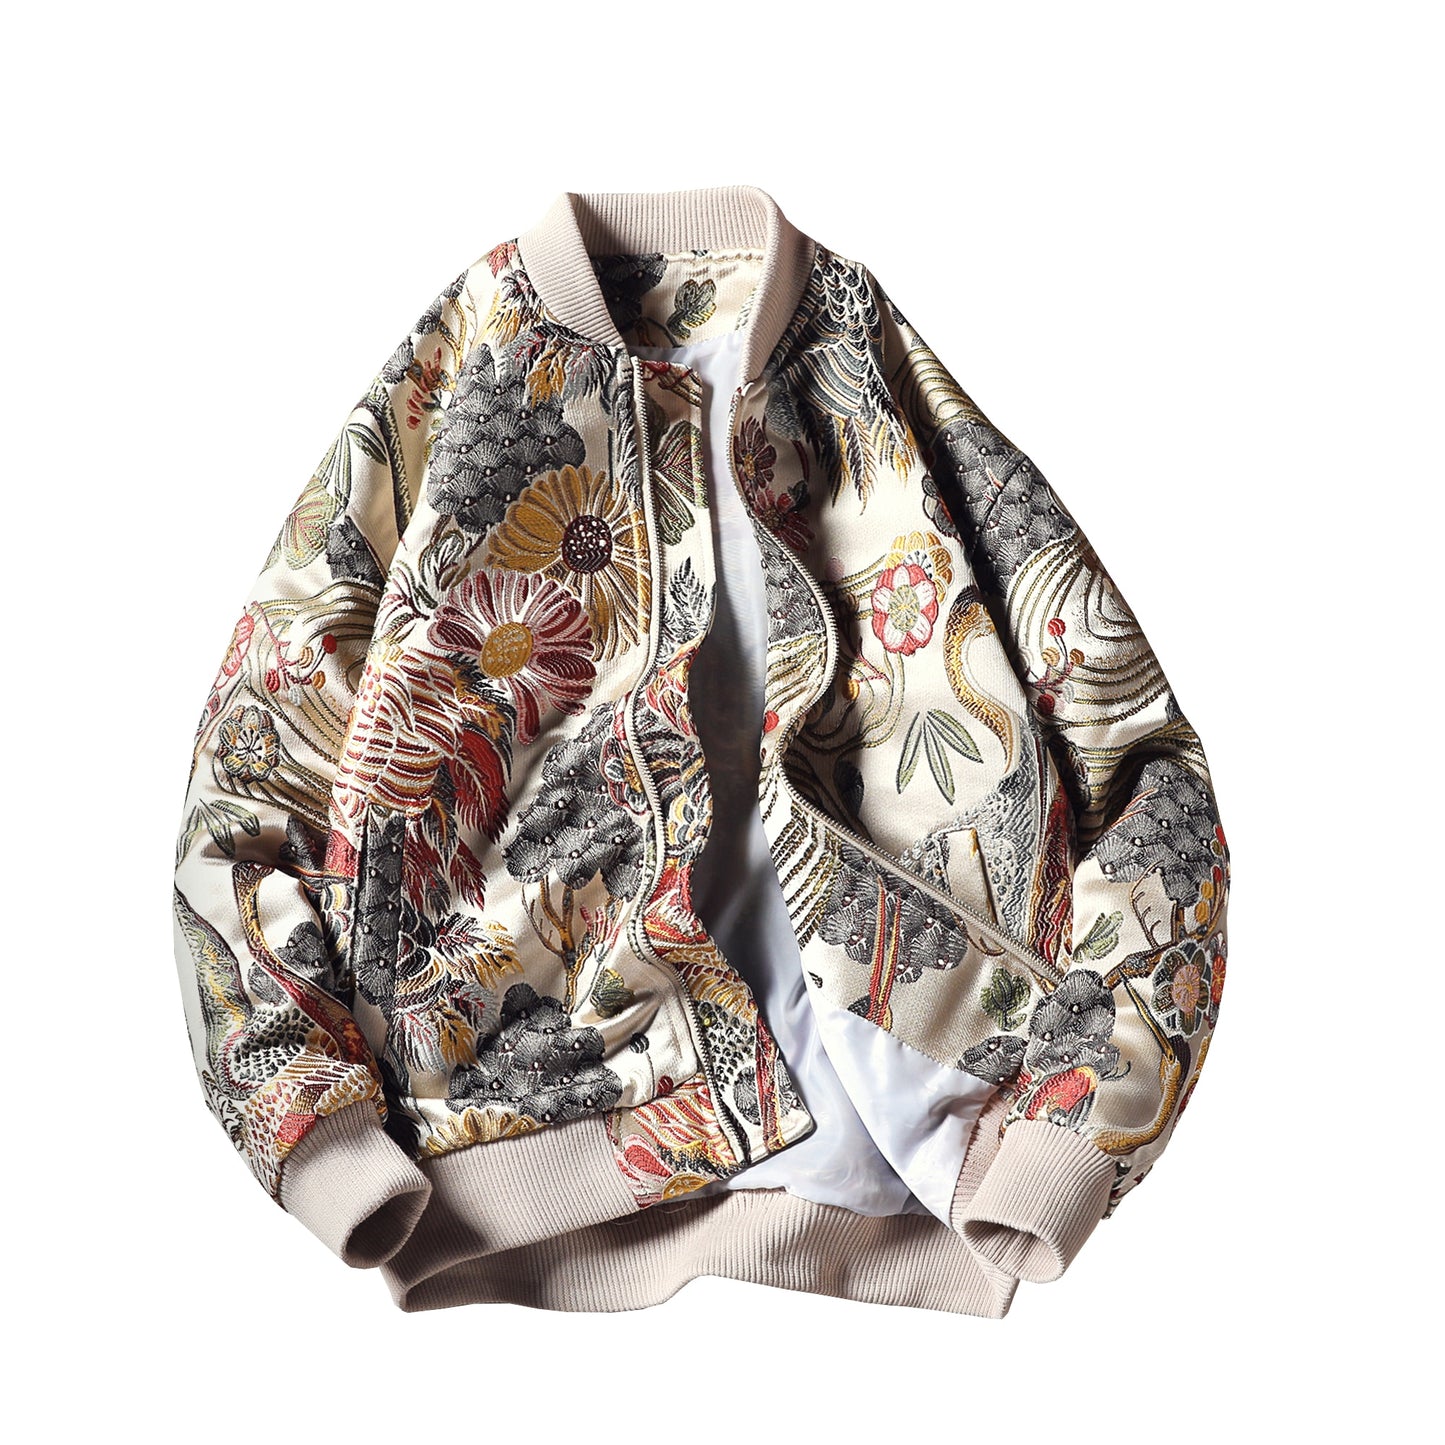 Urban REVI's Embroidered Jacket